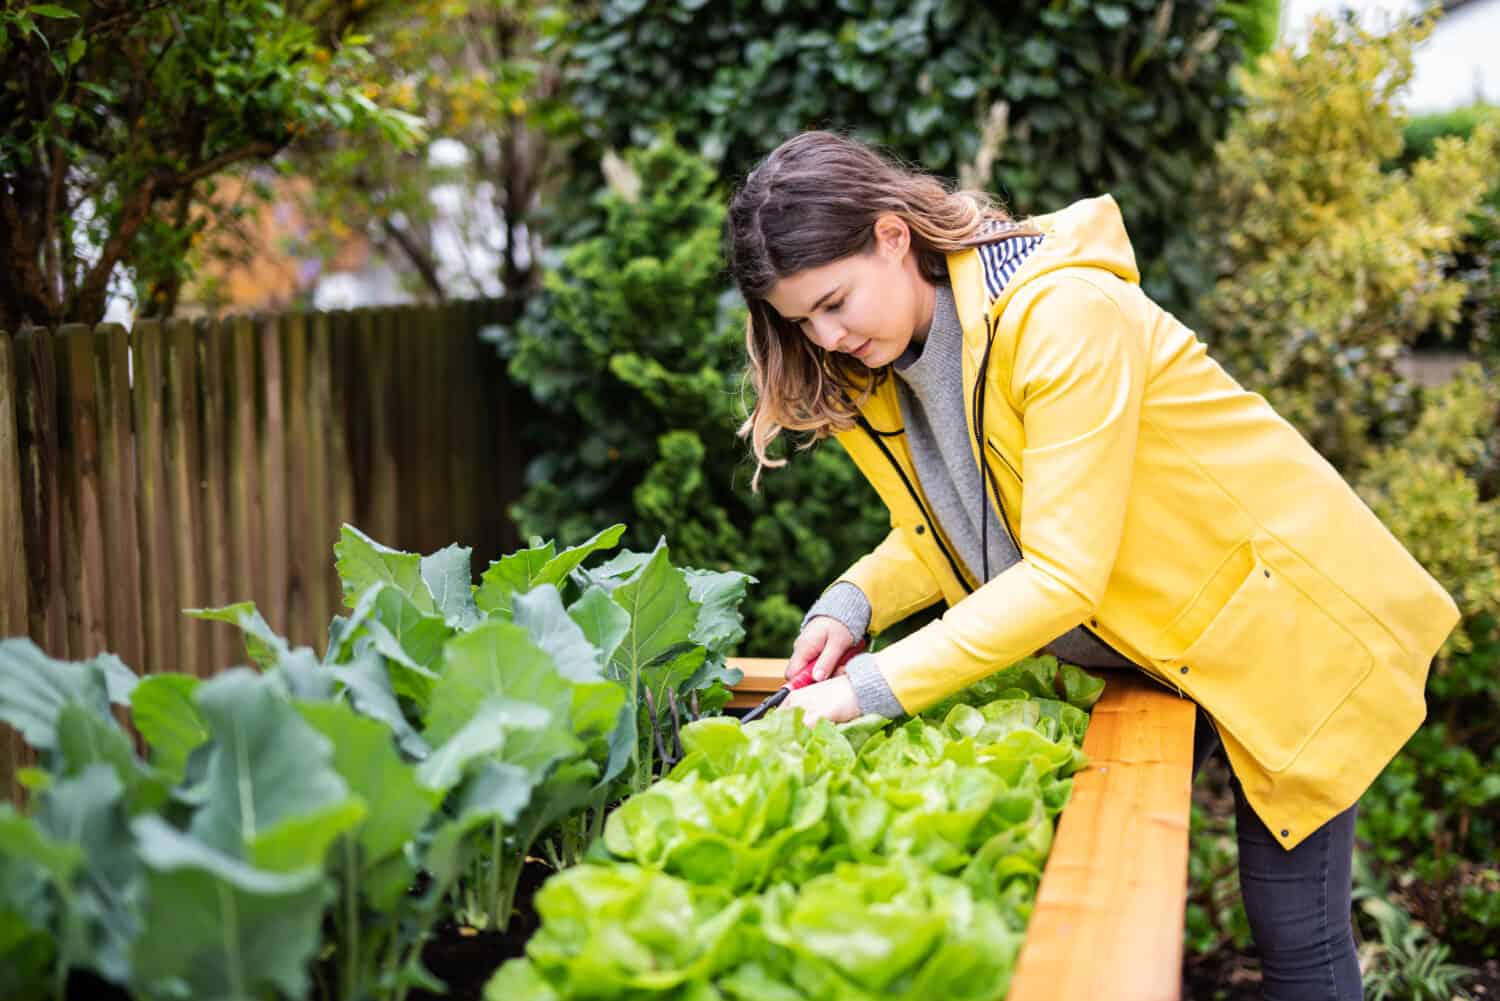 Young woman is posing in garden salad in a raised bed